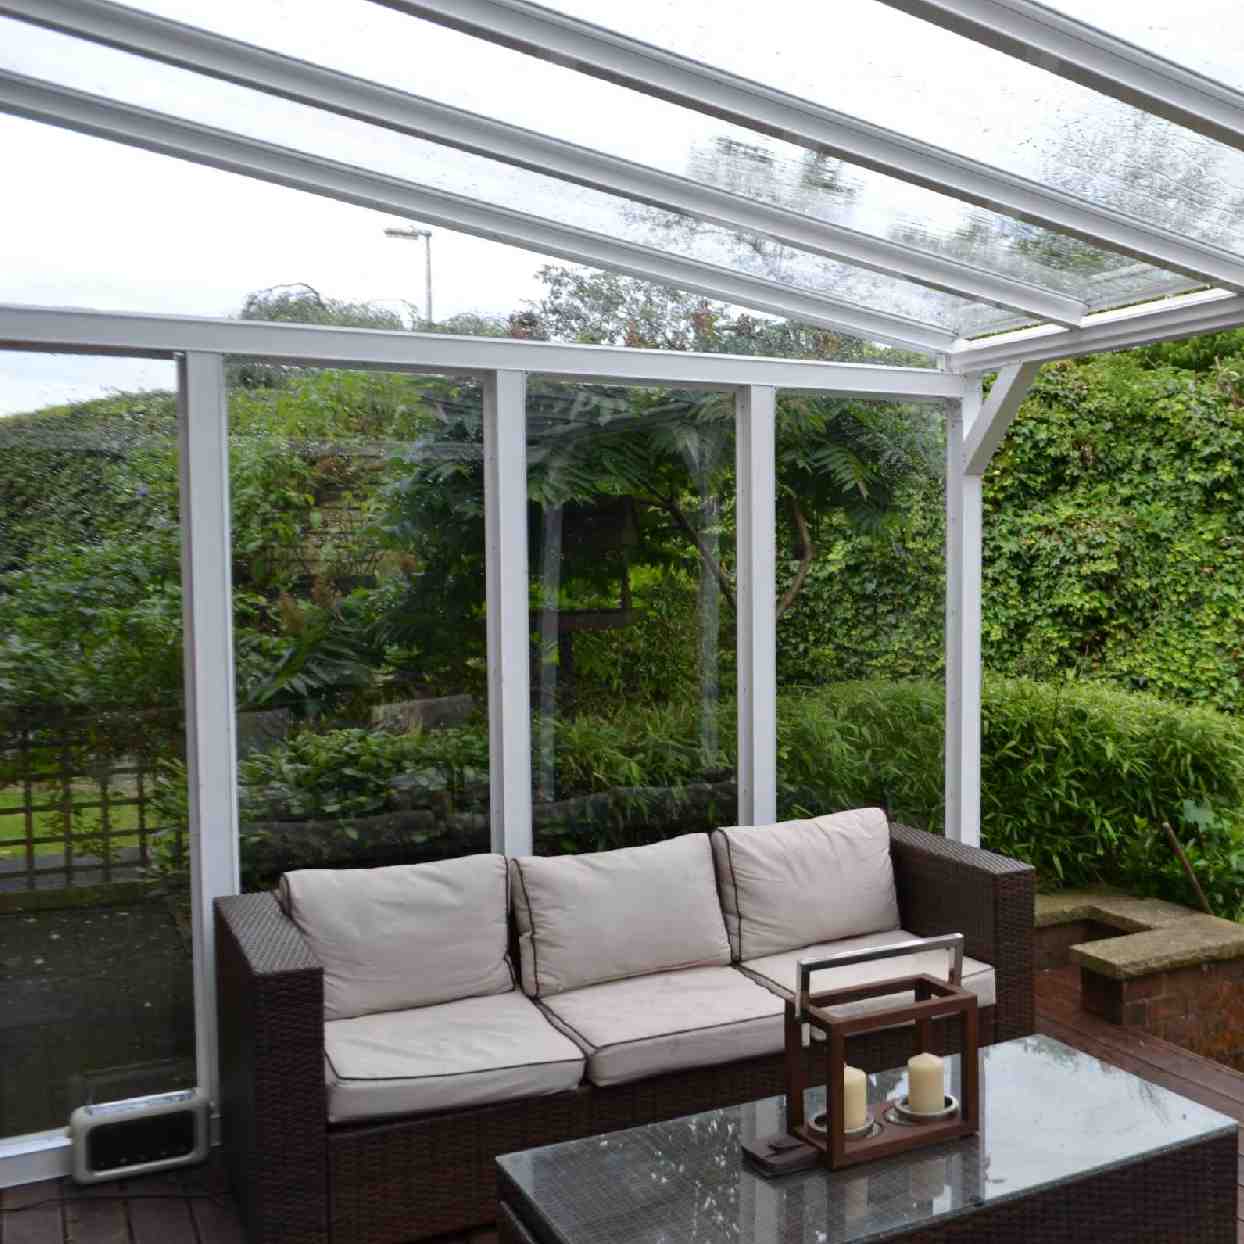 Buy Omega Verandah White with 16mm Polycarbonate Glazing - 3.1m (W) x 2.0m (P), (2) Supporting Posts online today